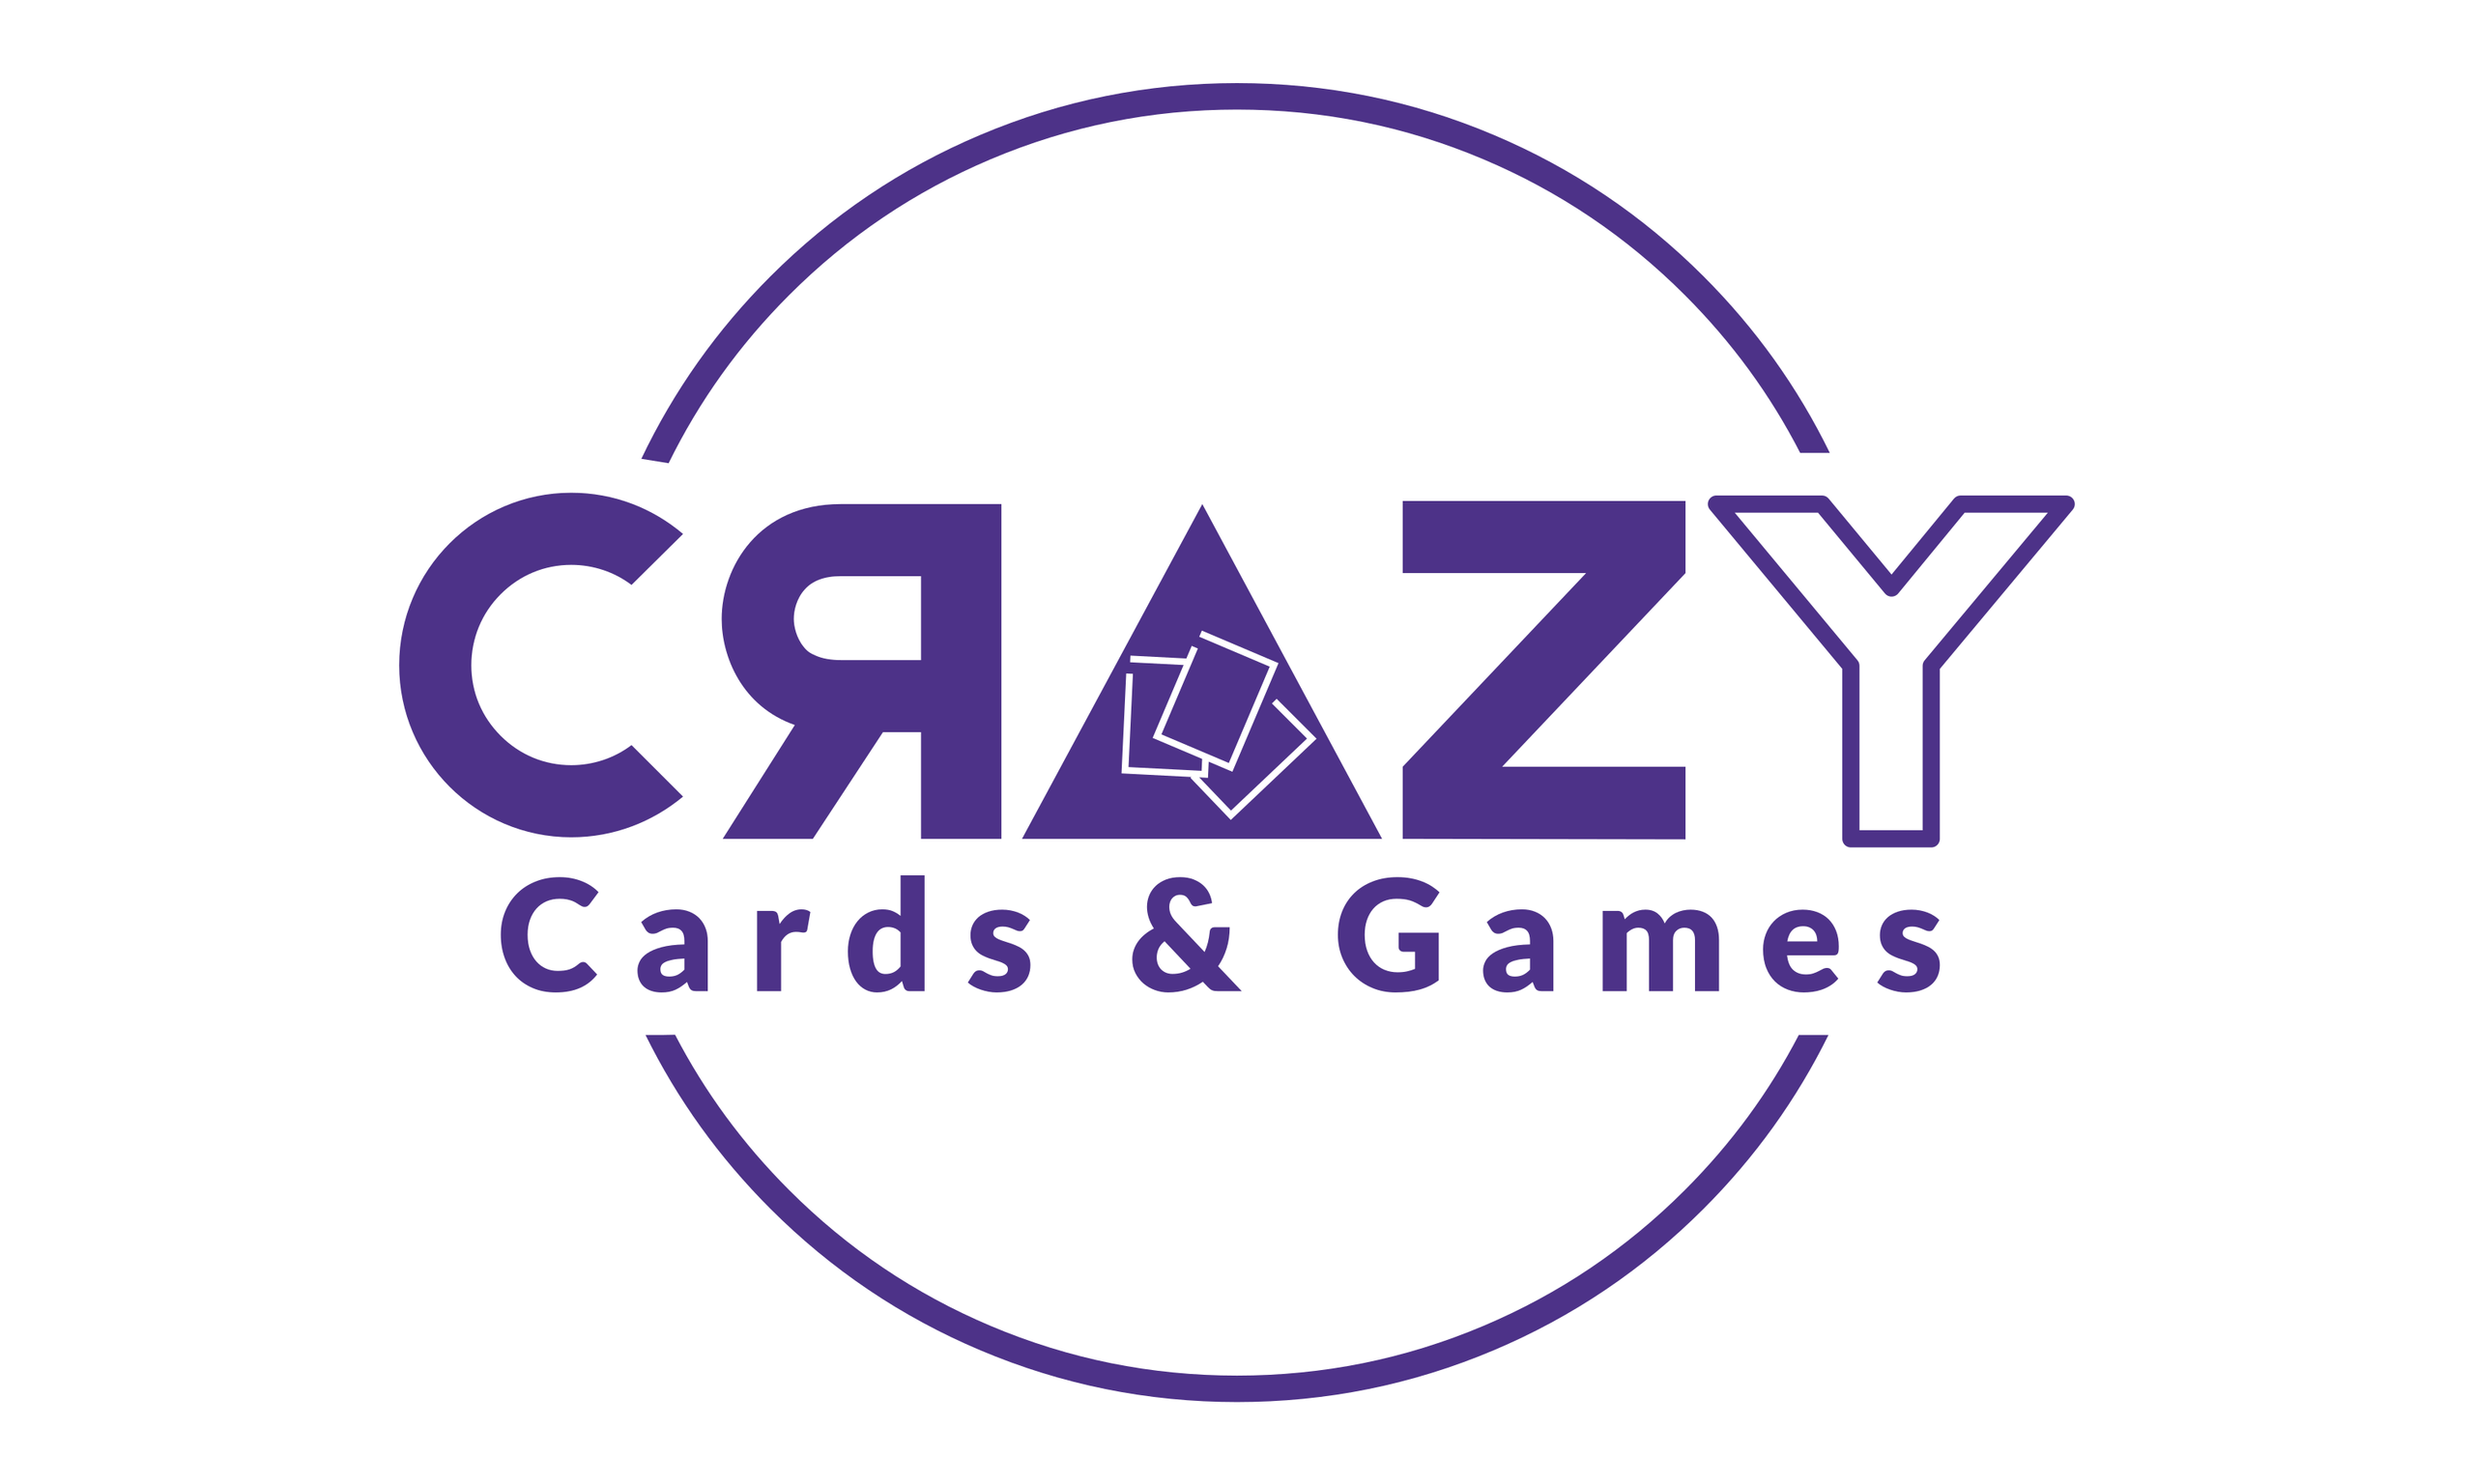 Crazy Cards & Games Ditta Individuale